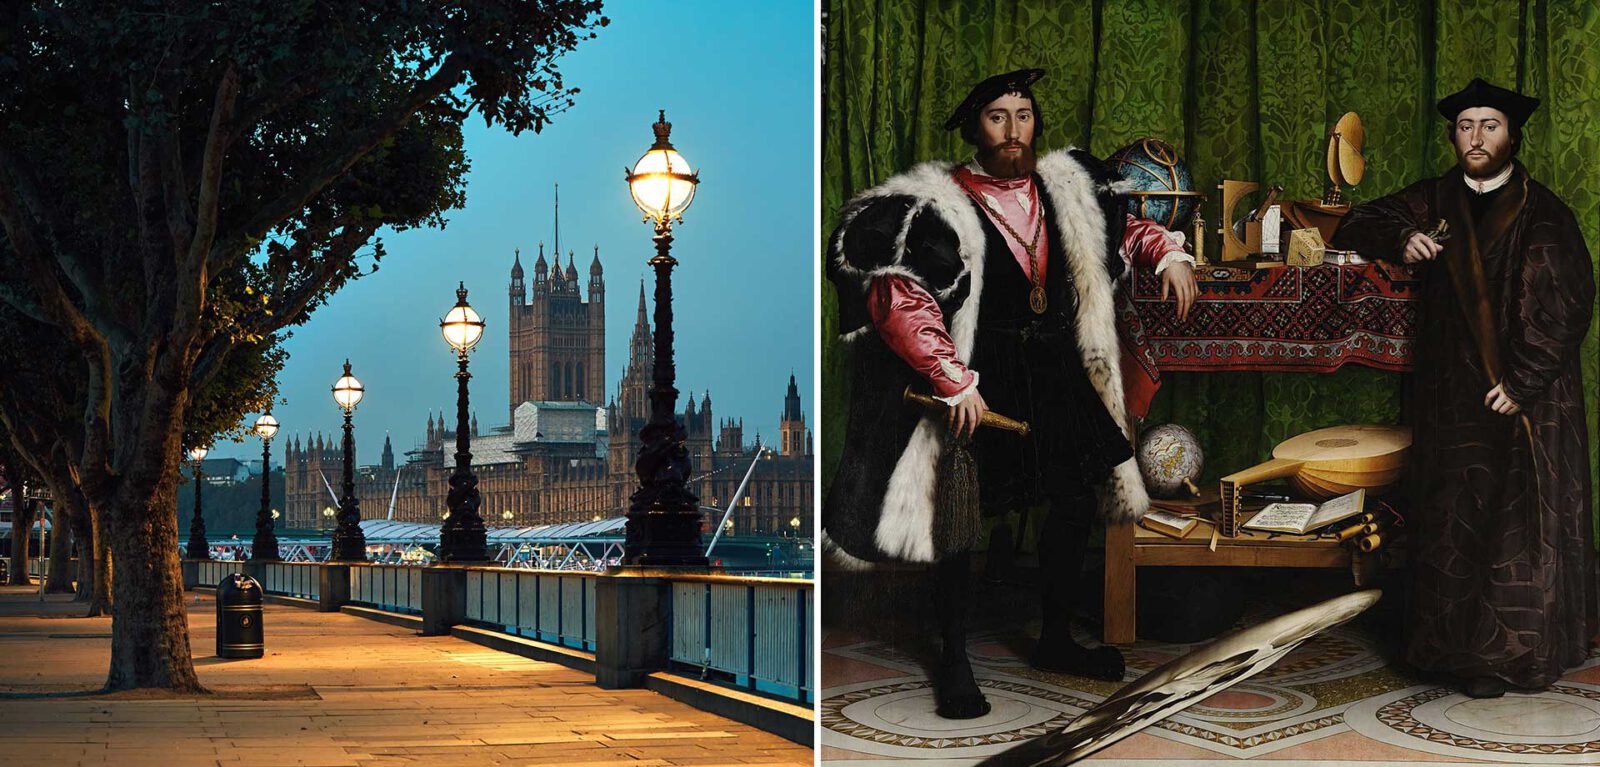 The Ambassadors Hans Holbein Jr. in London